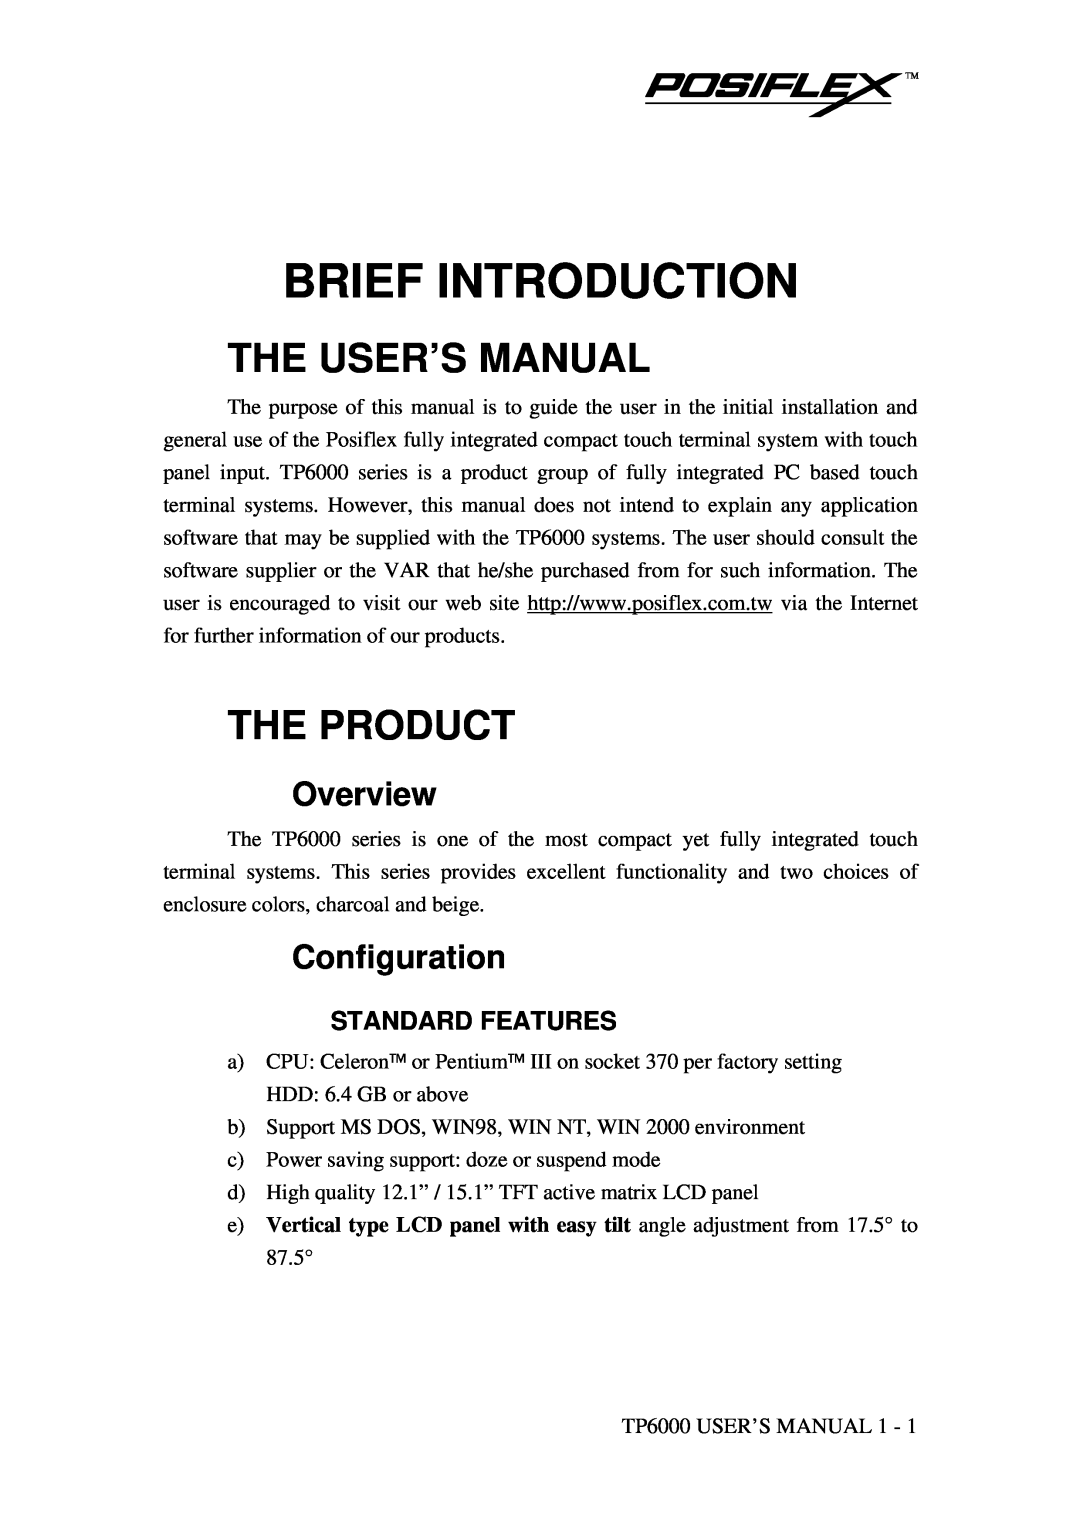 Mustek TP-6000 user manual Brief Introduction, The User’S Manual, The Product, Overview, Configuration, Standard Features 